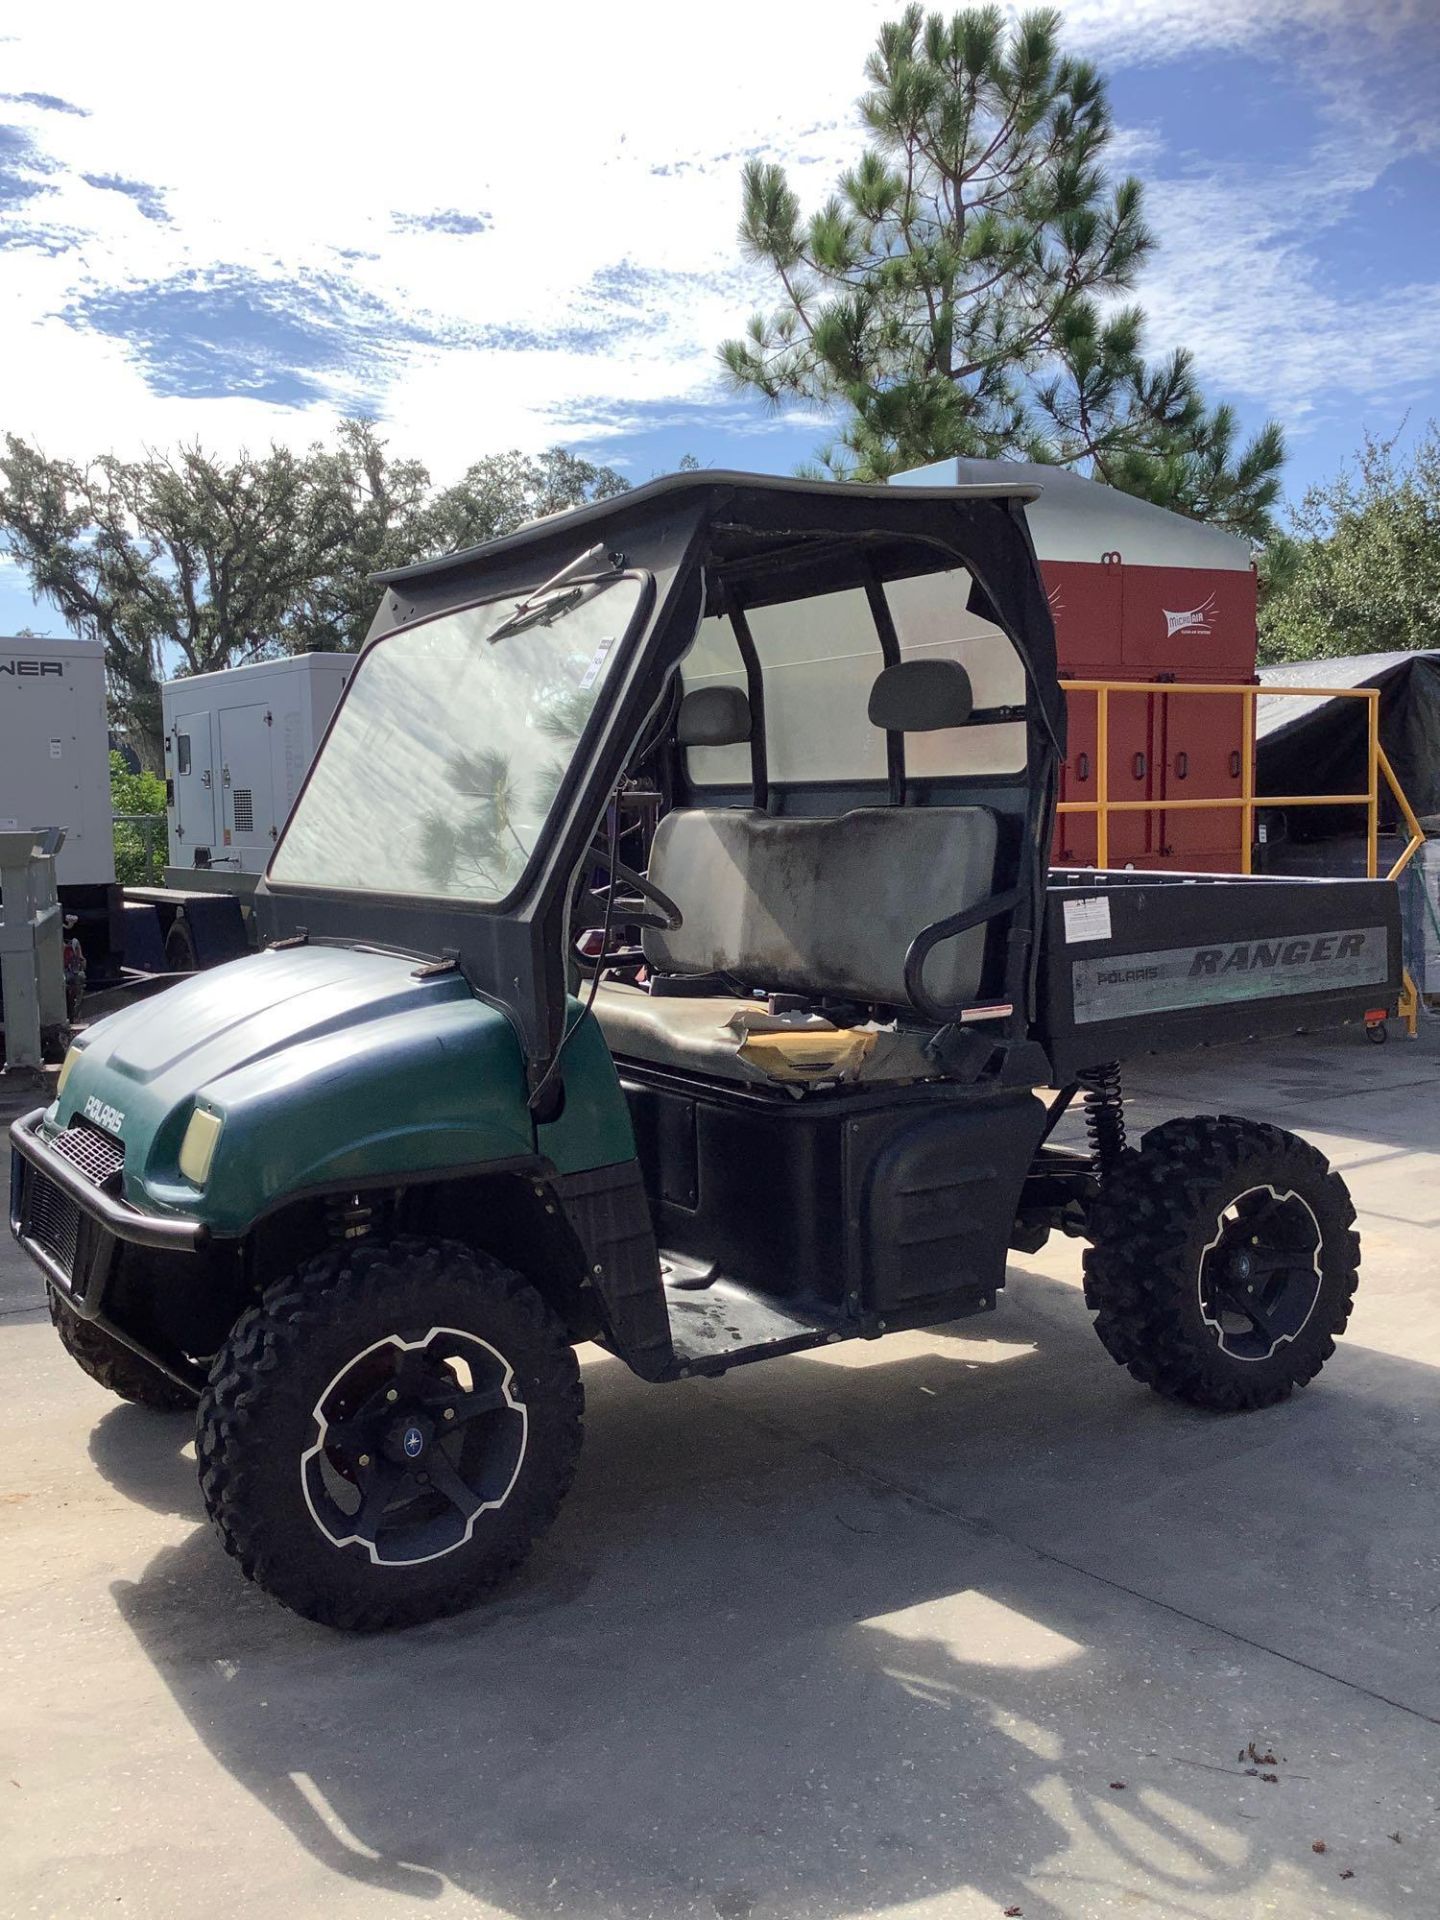 POLARIS RANGER 4x4, GAS POWERED, AWD, HITCH ON BACK, MANUAL DUMP BED, WINDSHIELD WIPER, RUNS AND OPE - Image 2 of 14